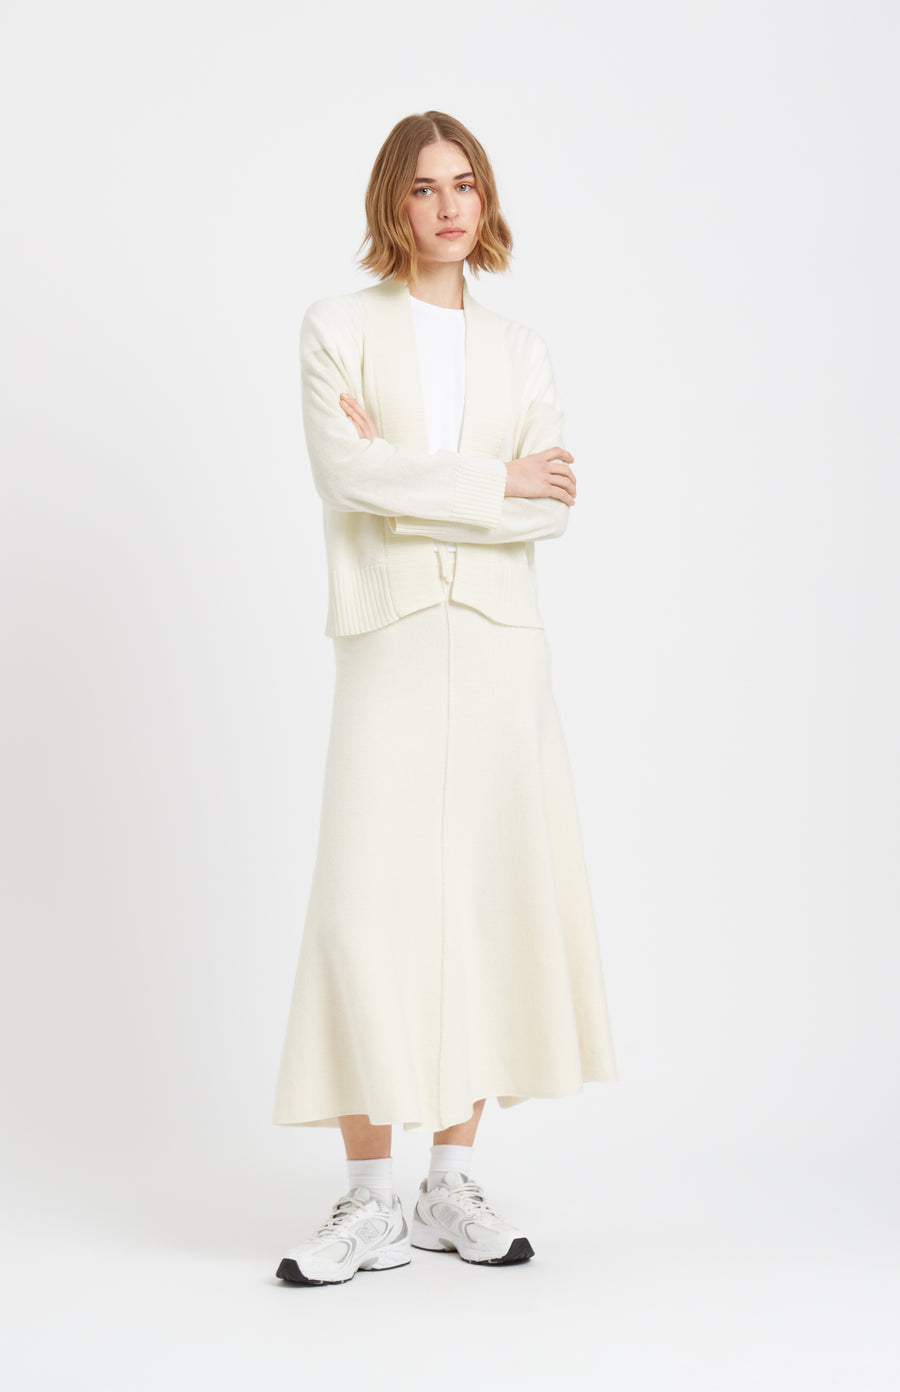 Pringle of Scotland Lightweight Cashmere Cardigan with Tie in Off White with matching skirt